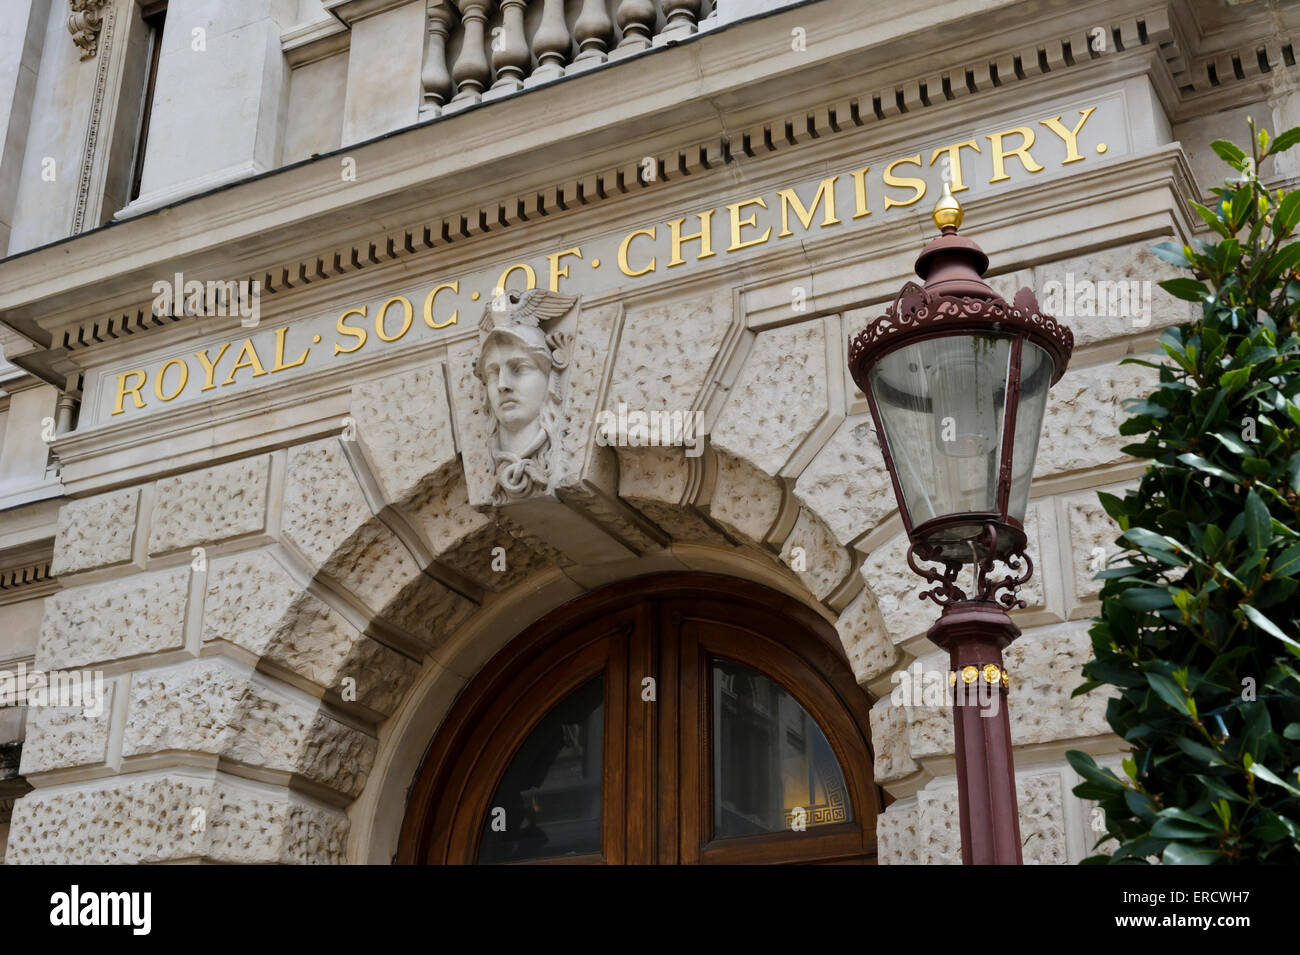 A sign above the entrance to the Royal Society of Chemistry at the Academy of Arts, London, England. Stock Photo